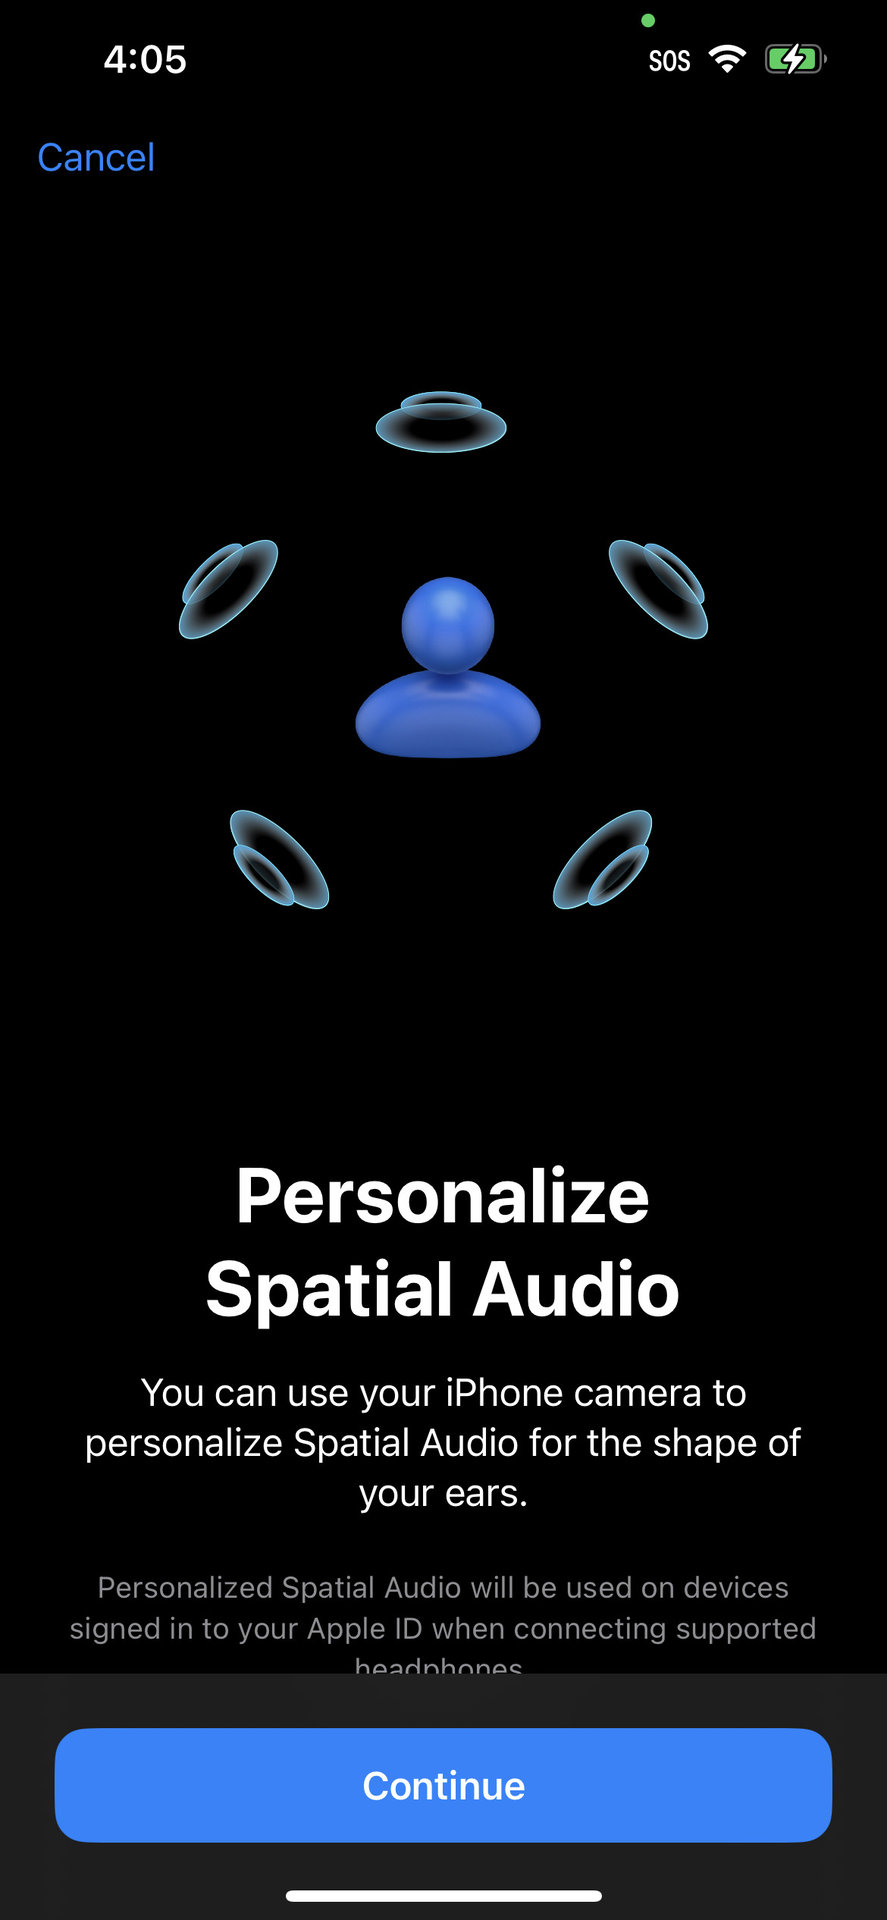 A screenshot of the AirPods Pro 2 settings page in the iPhone Settings app showing the Personalized Spatial Audio feature.